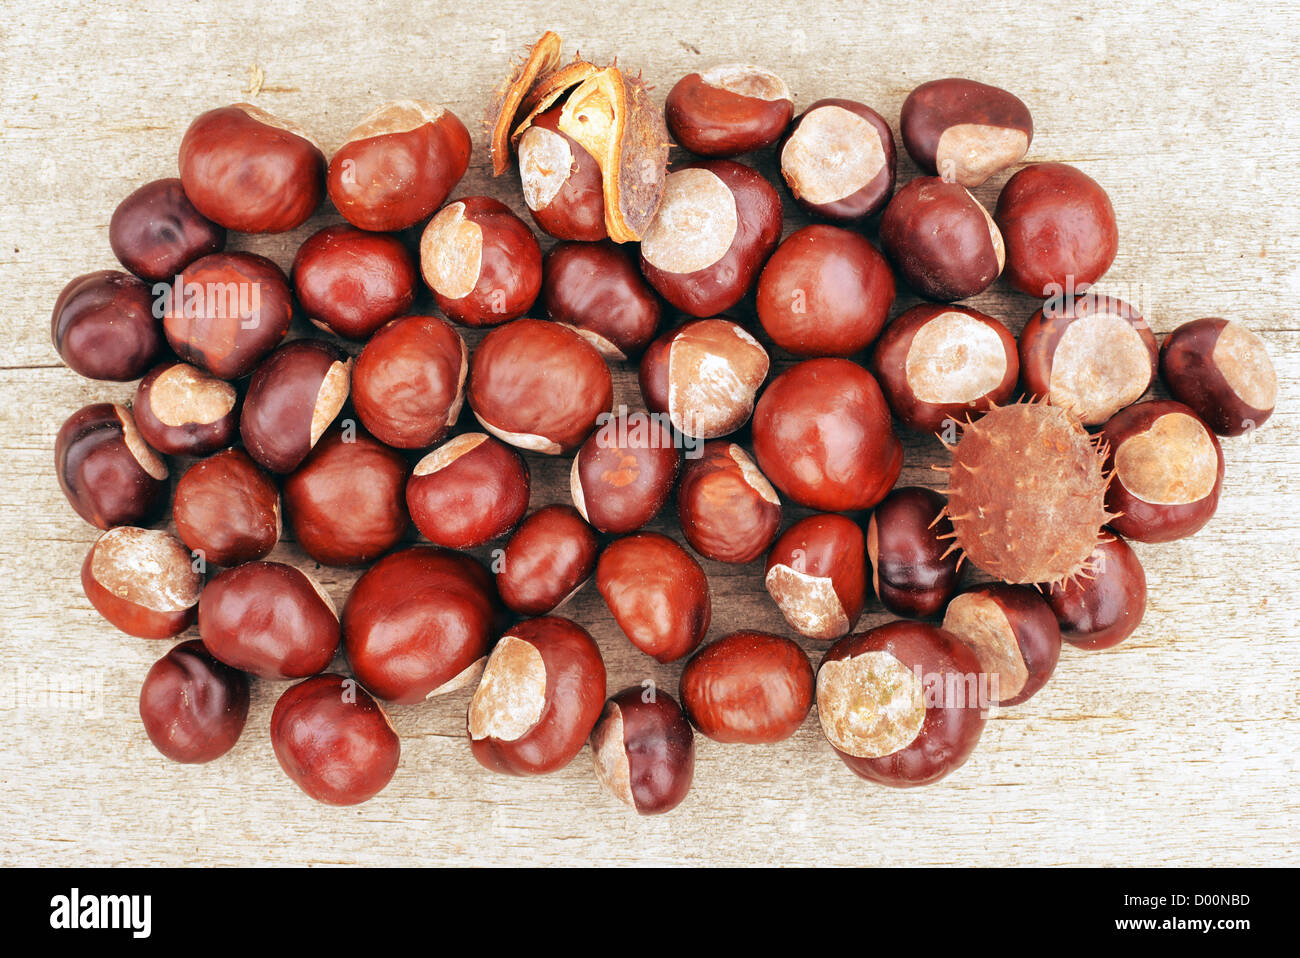 Pile of brown horse chestnuts over a wooden background Stock Photo